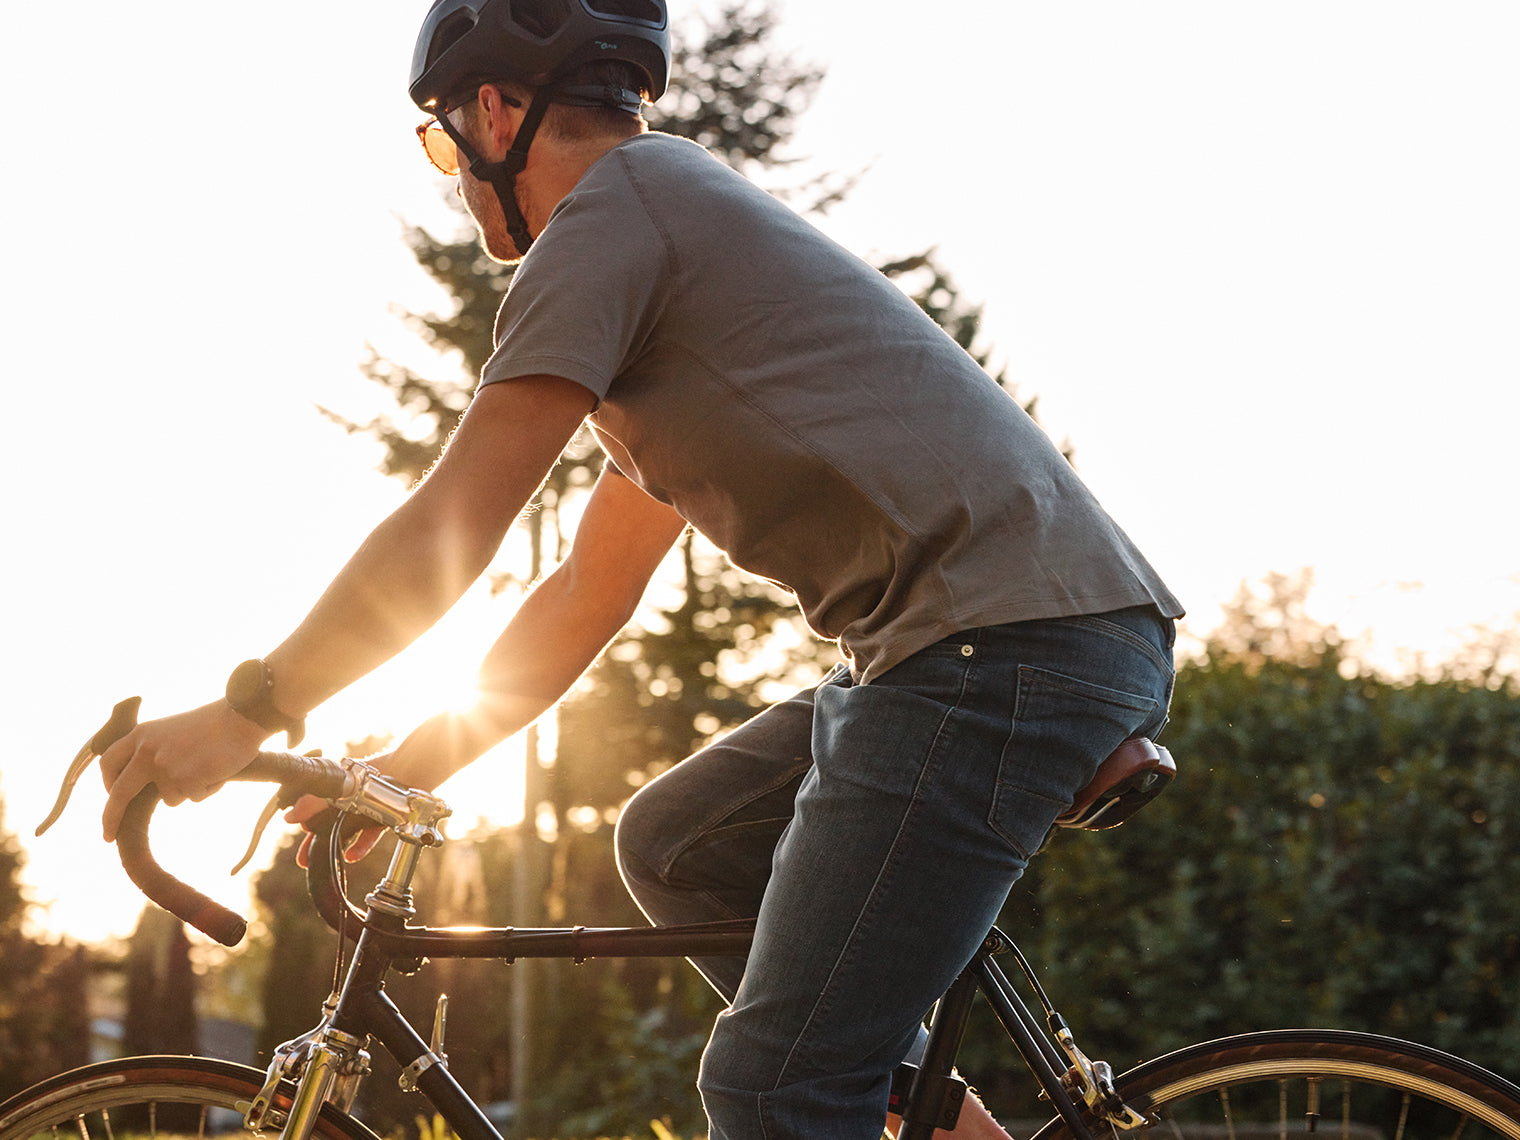 A person wearing a helmet and sunglasses rides a bicycle outdoors during sunset. They are dressed in a grey T-shirt and jeans